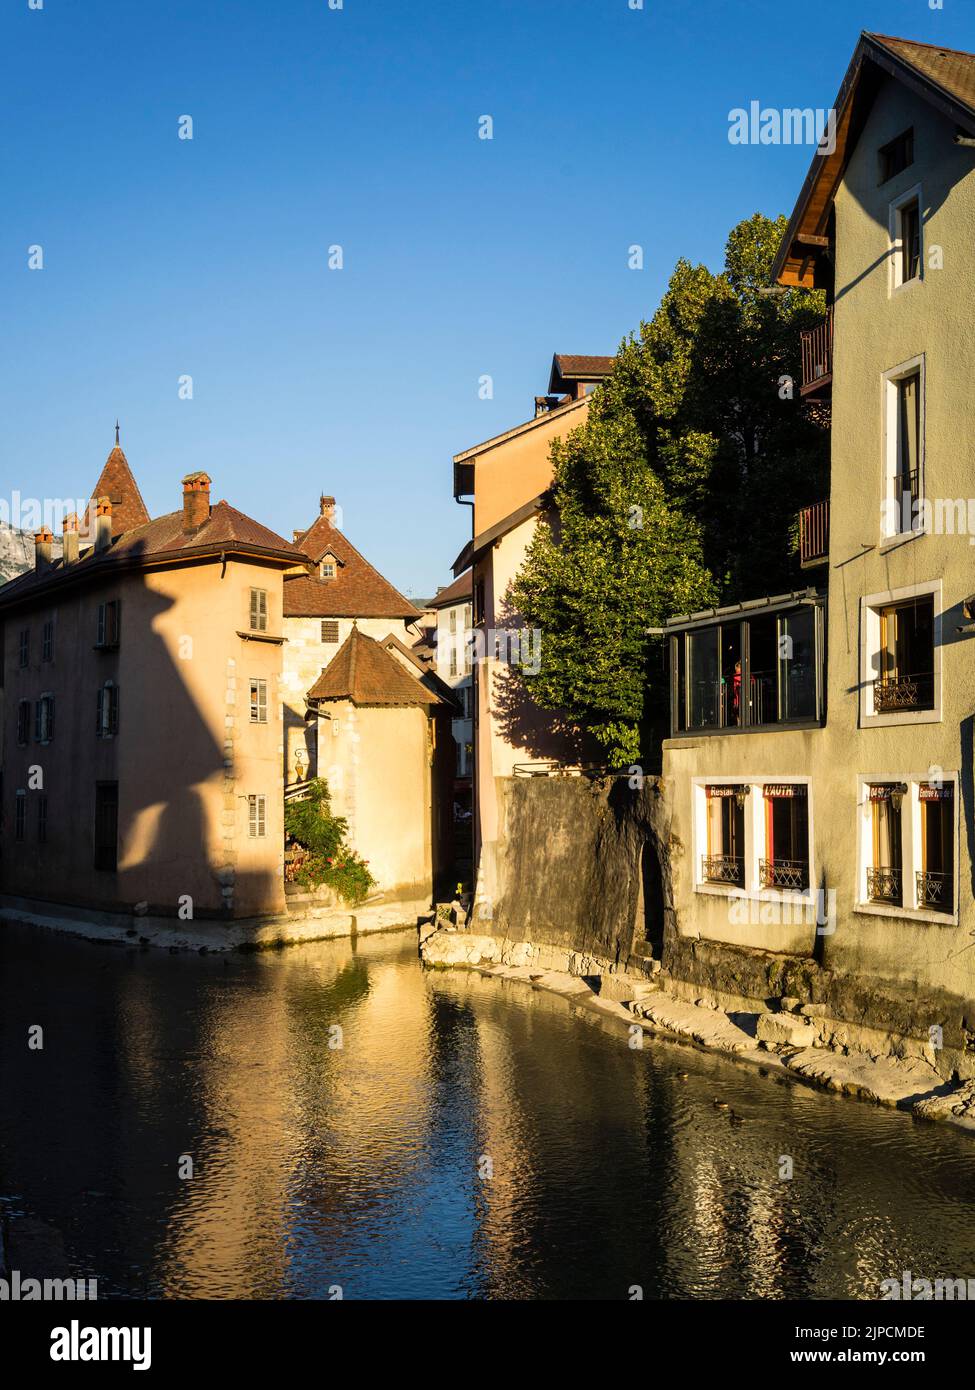 Street scene in Annecy downtown (French Alps) Stock Photo